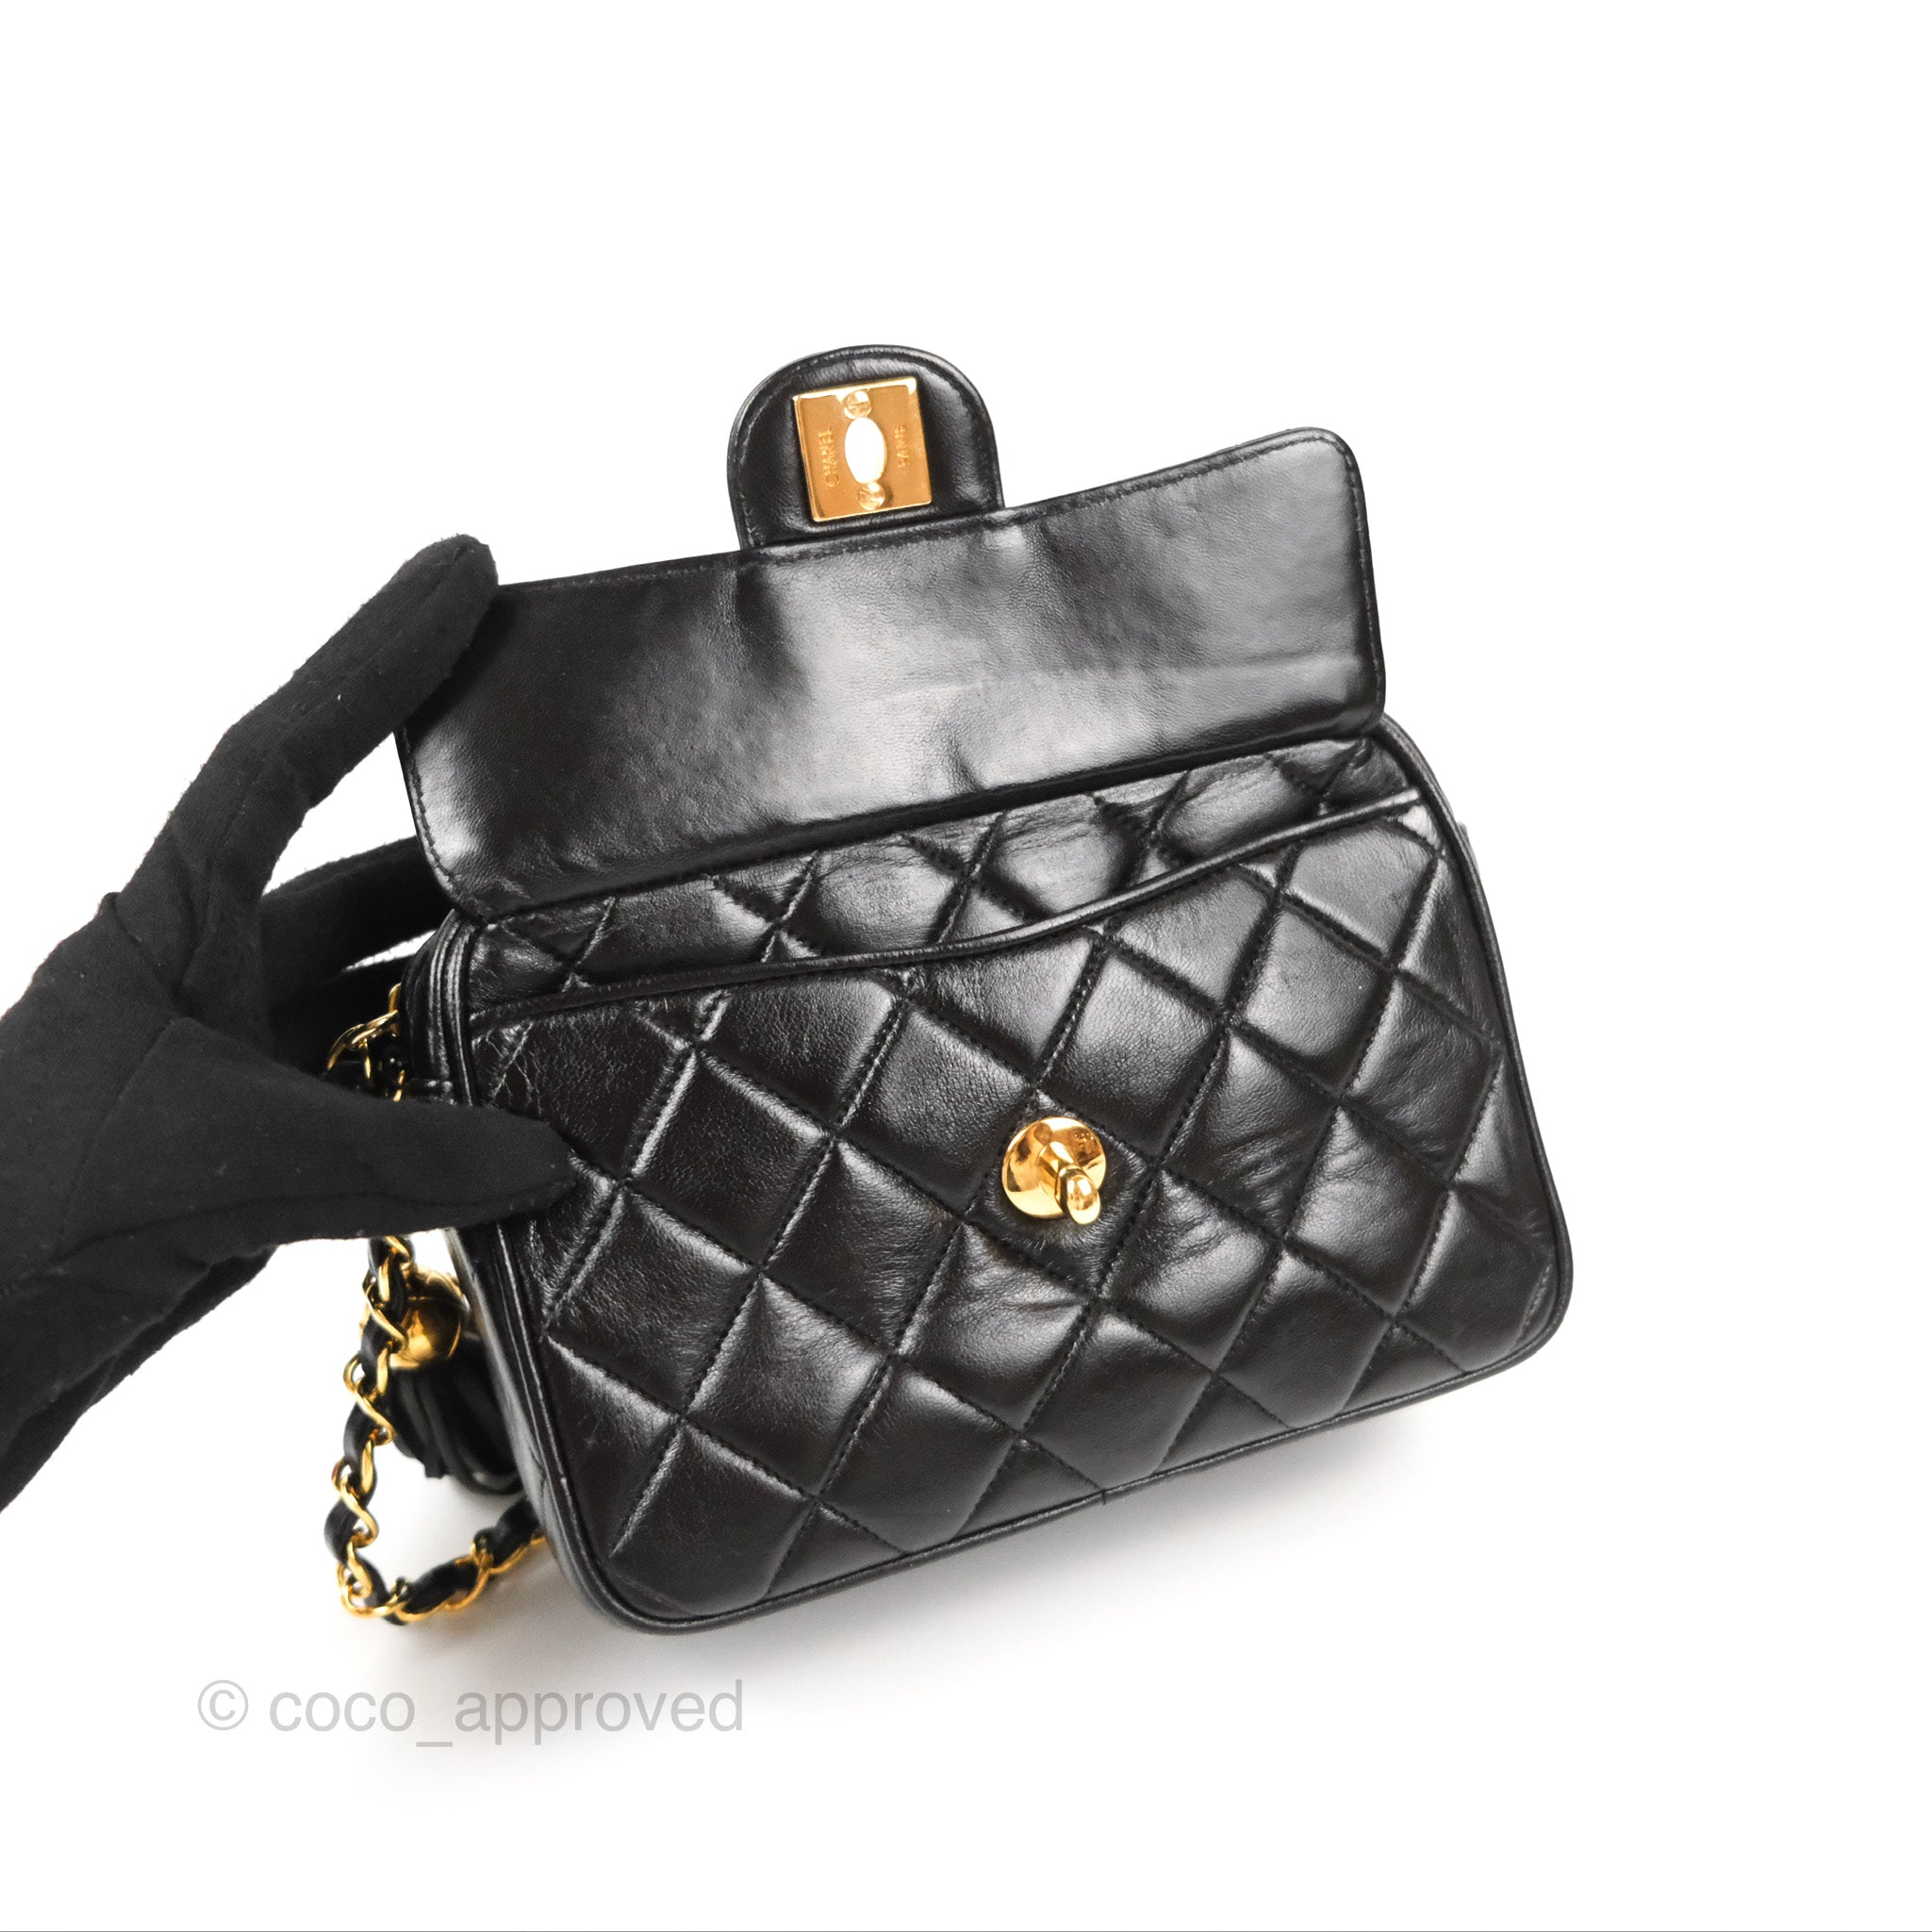 CHANEL 1990s Quilted Black Leather Crossbody Bag with Tassel – The